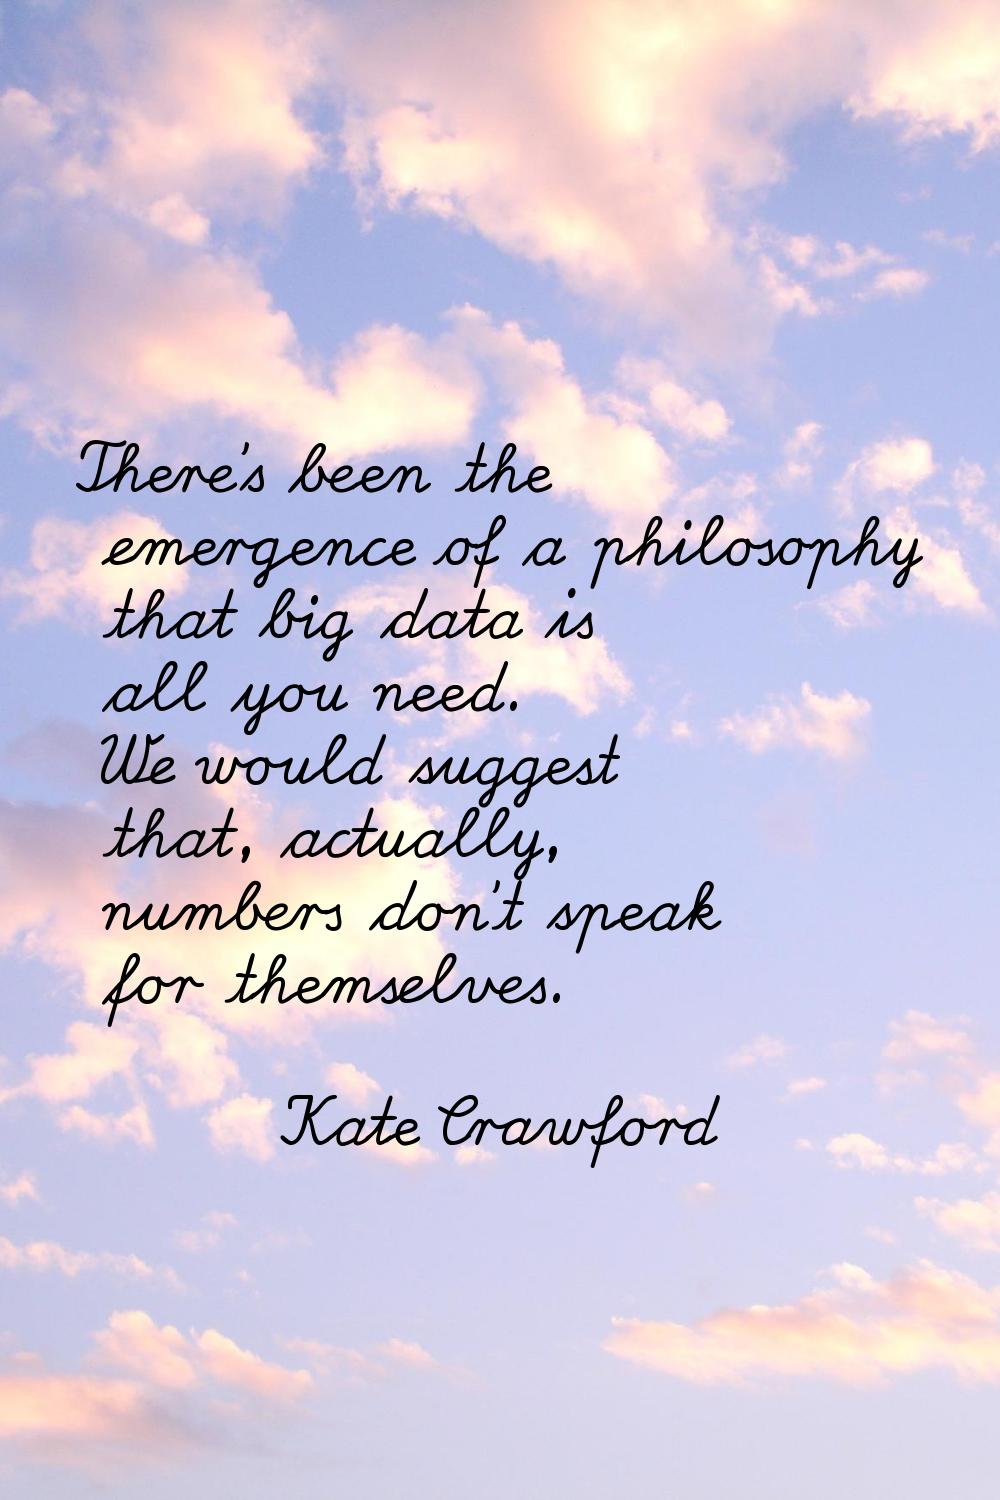 There's been the emergence of a philosophy that big data is all you need. We would suggest that, ac